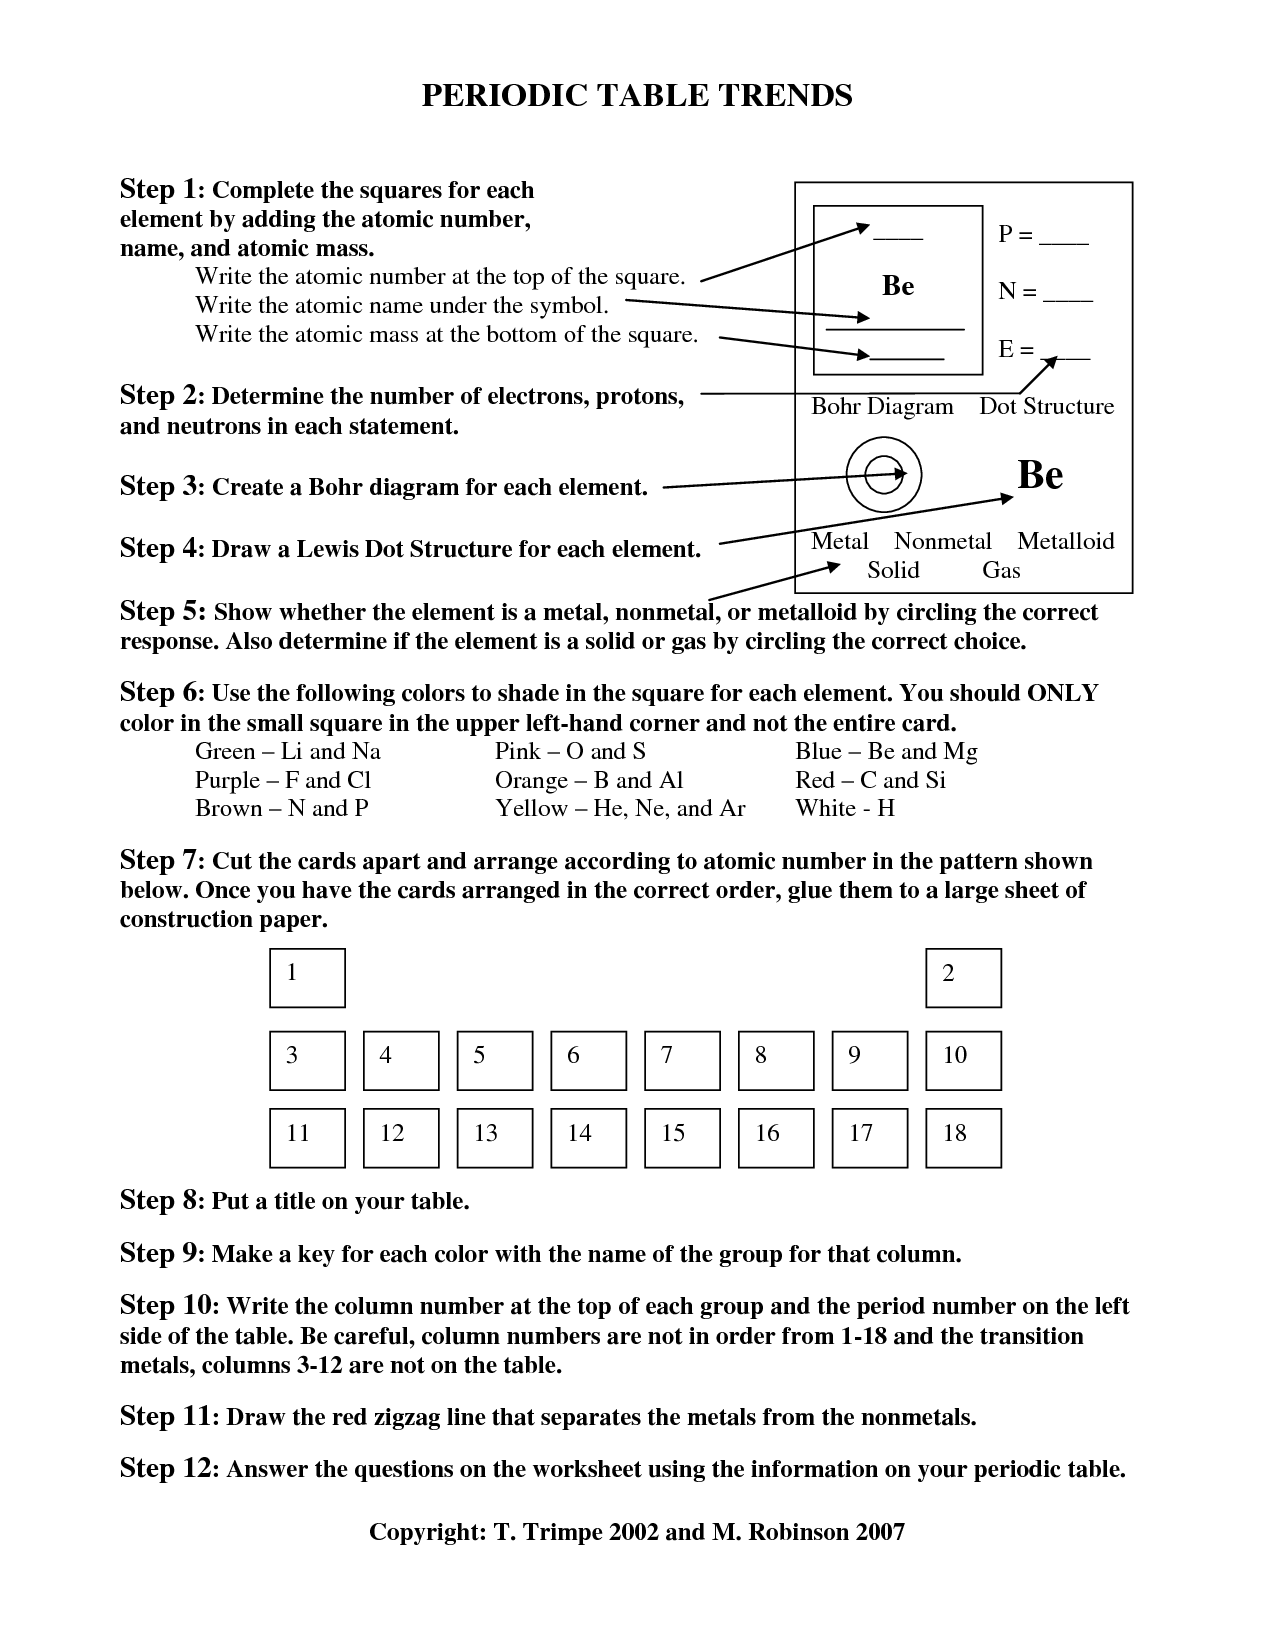 20 Best Images of Periodic Trends Worksheet Answers Key Periodic